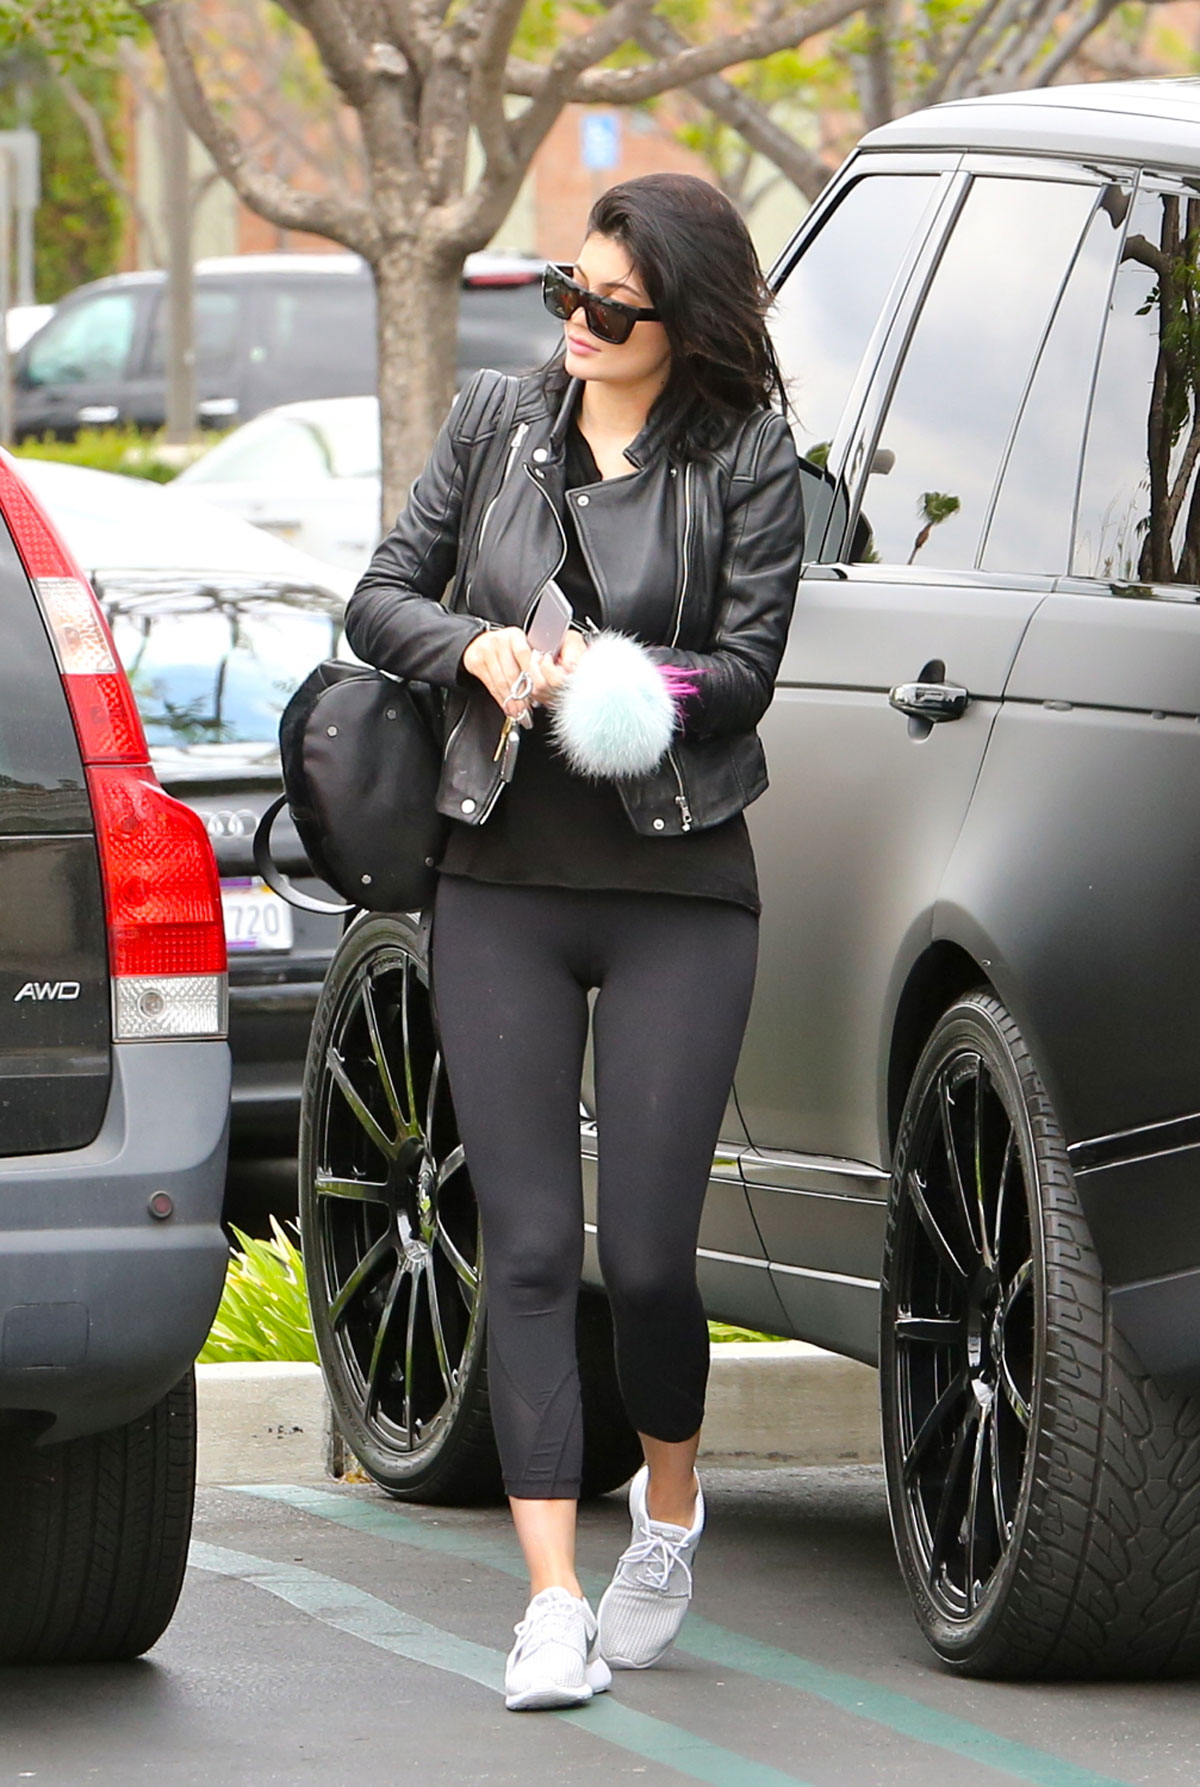 Kylie Jenner out shopping in Calabasas